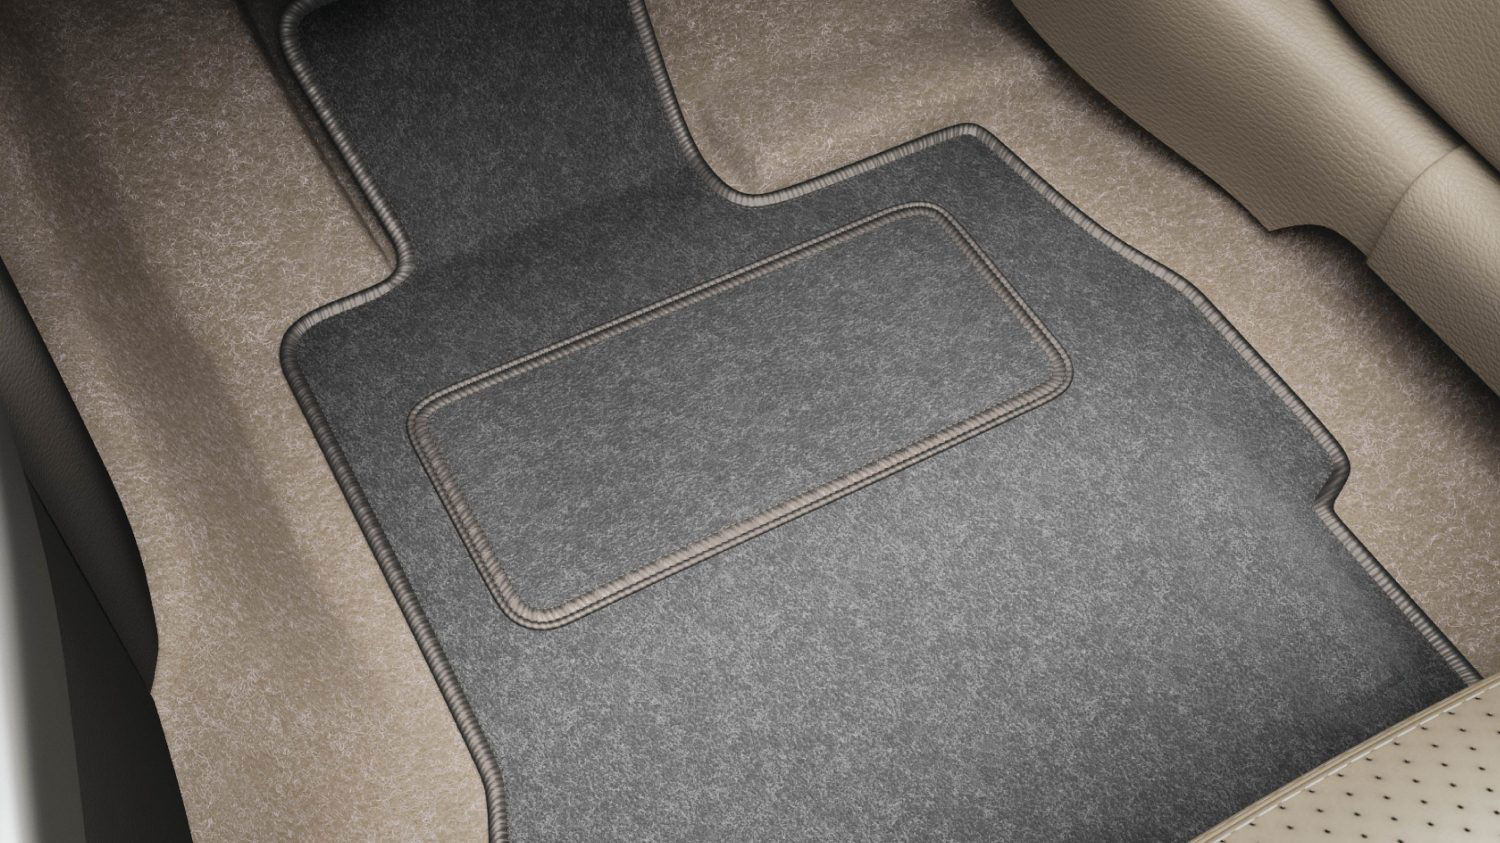 Global Automotive Floor Mats Market Is Estimated To Be Valued At US$11.7 Million In 2022 And Is Expected To Exhibit A CAGR Of 4.5% Over The Forecast Period Of 2023-2030